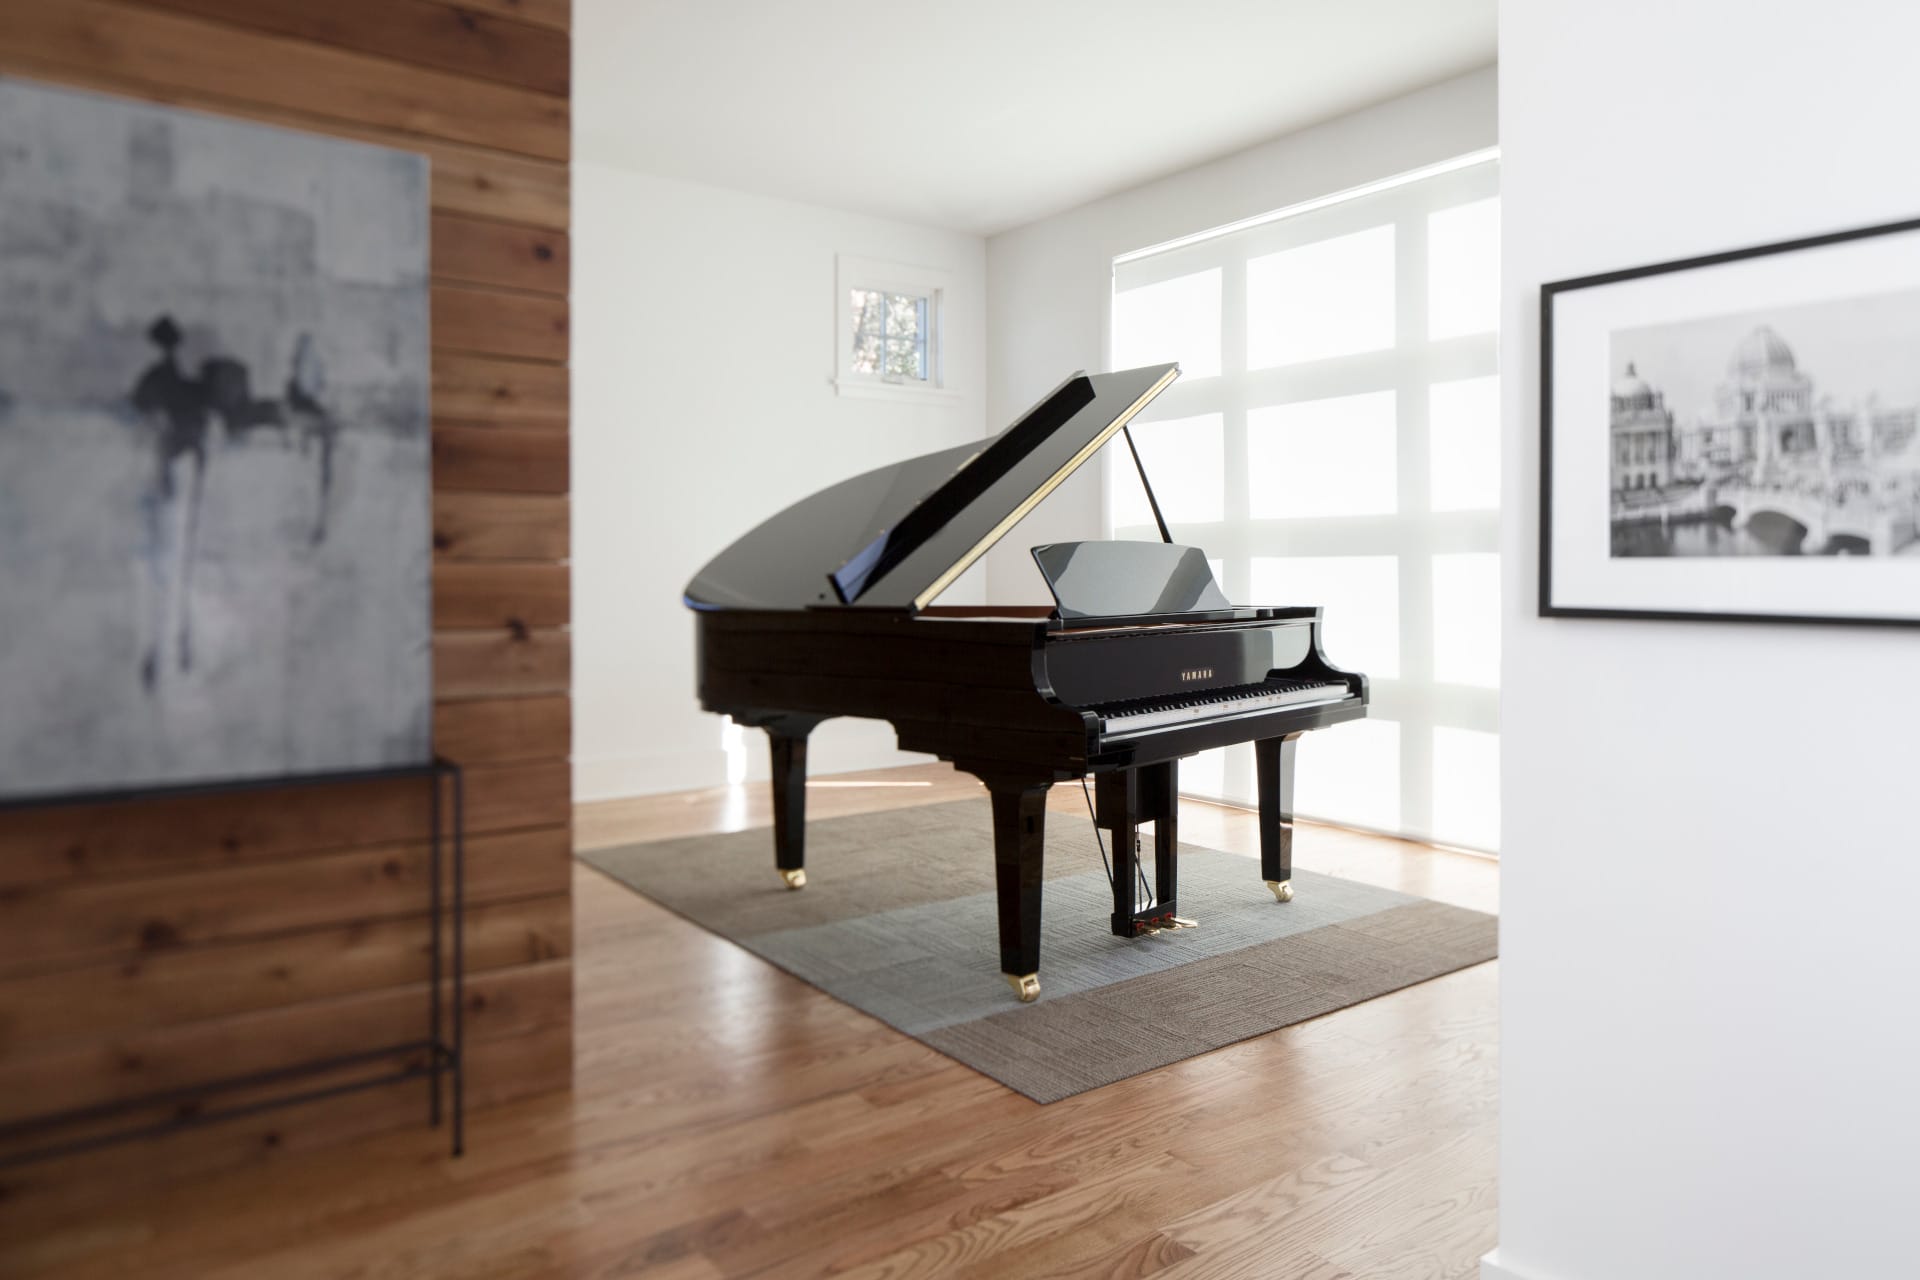 lifestyle image showing yamaha disklavier piano in a room